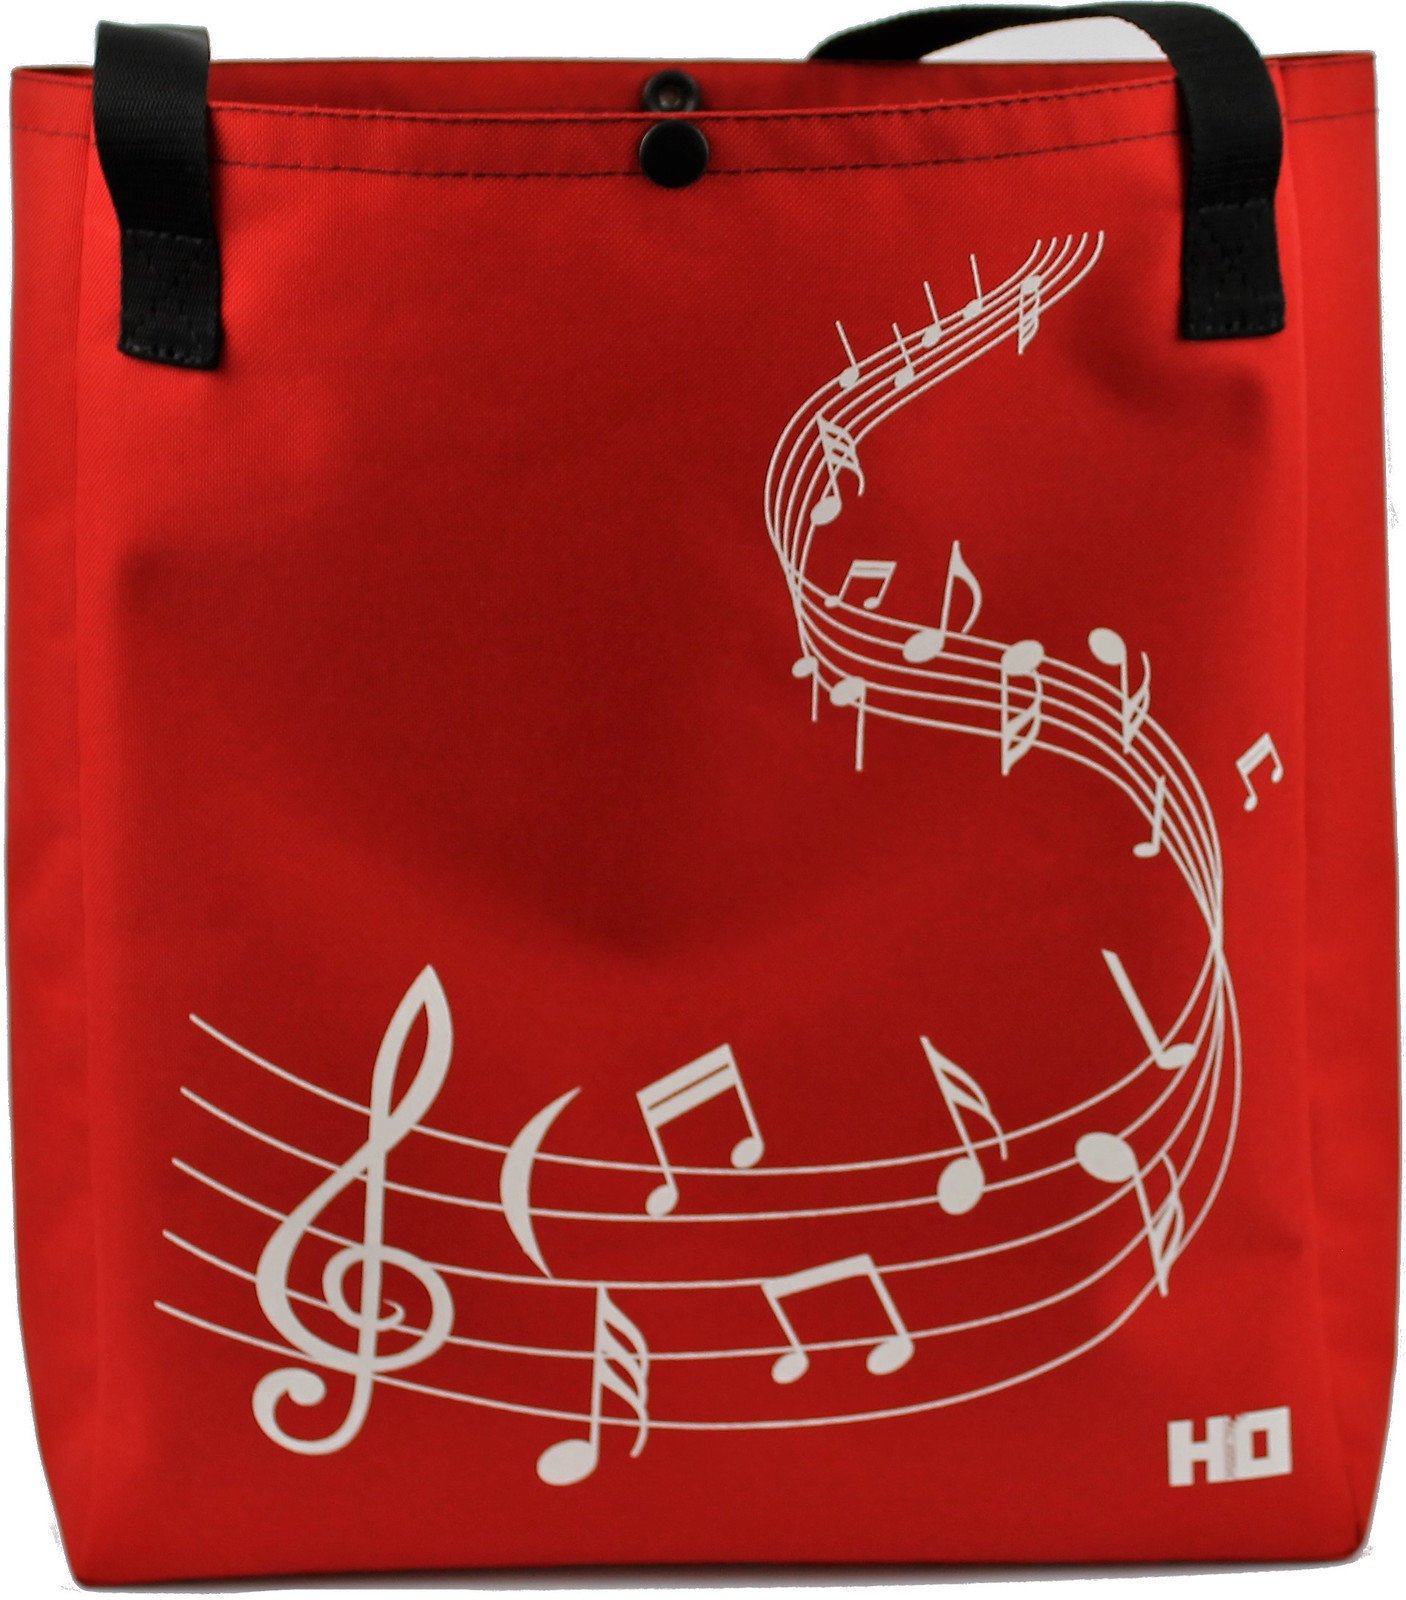 Shopping Bag Hudební Obaly H-O Melody Red-Red